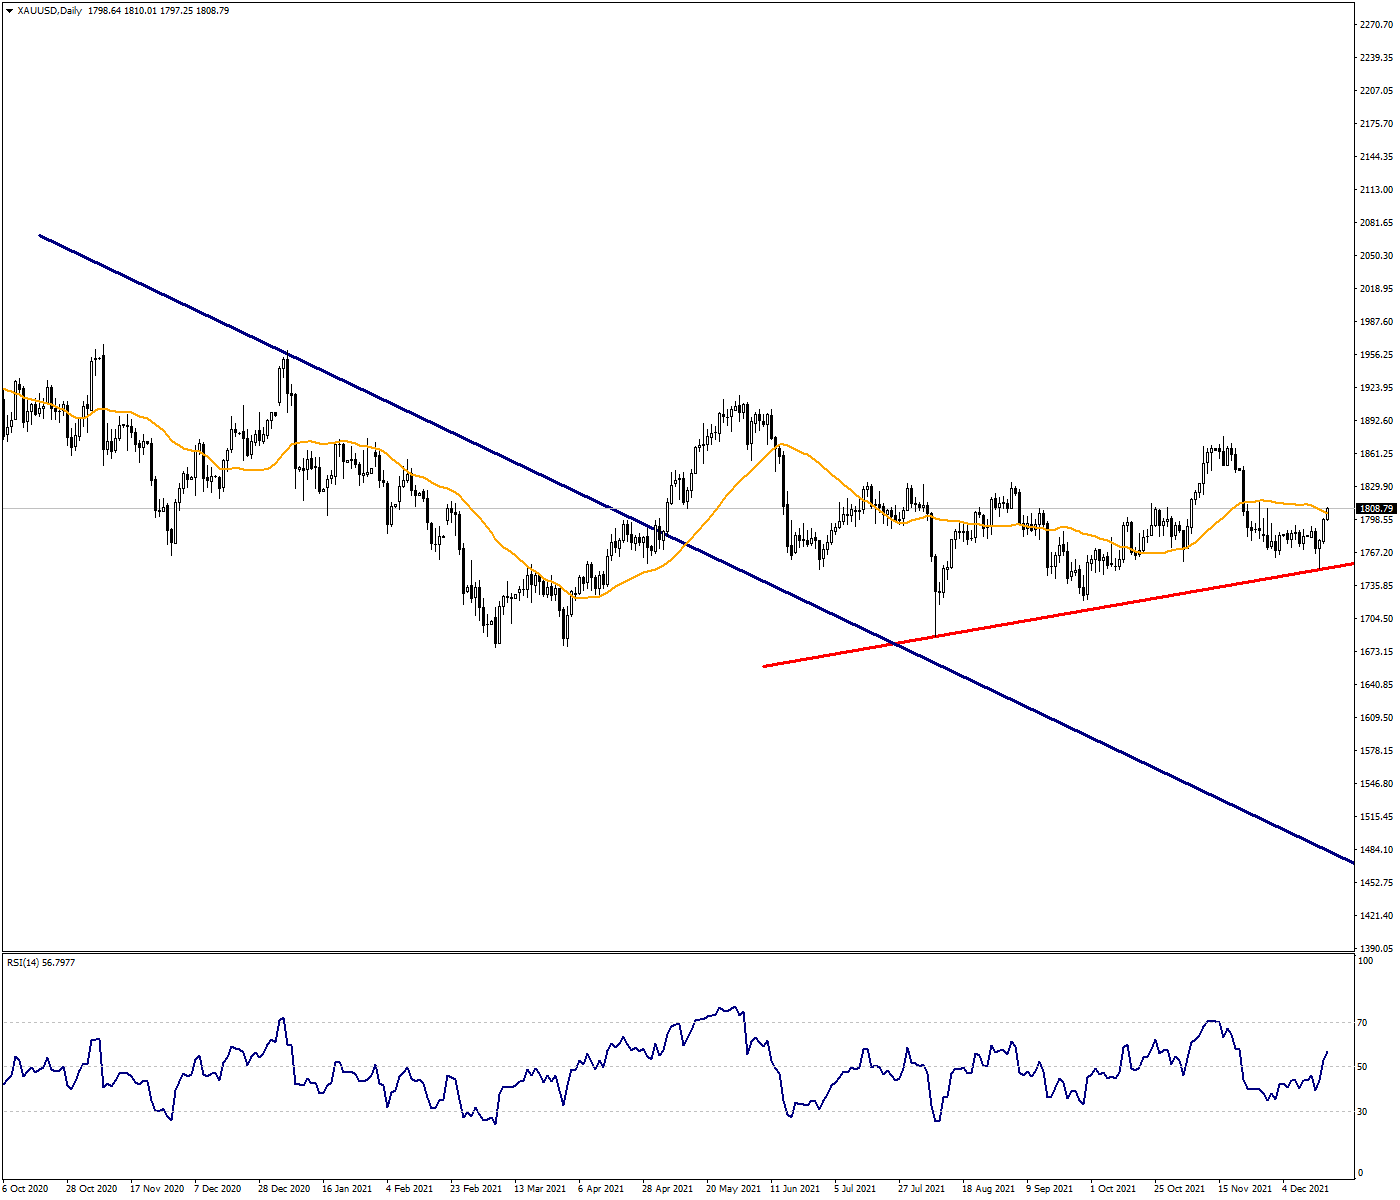 XAUUSD recoveries with a strong reaction